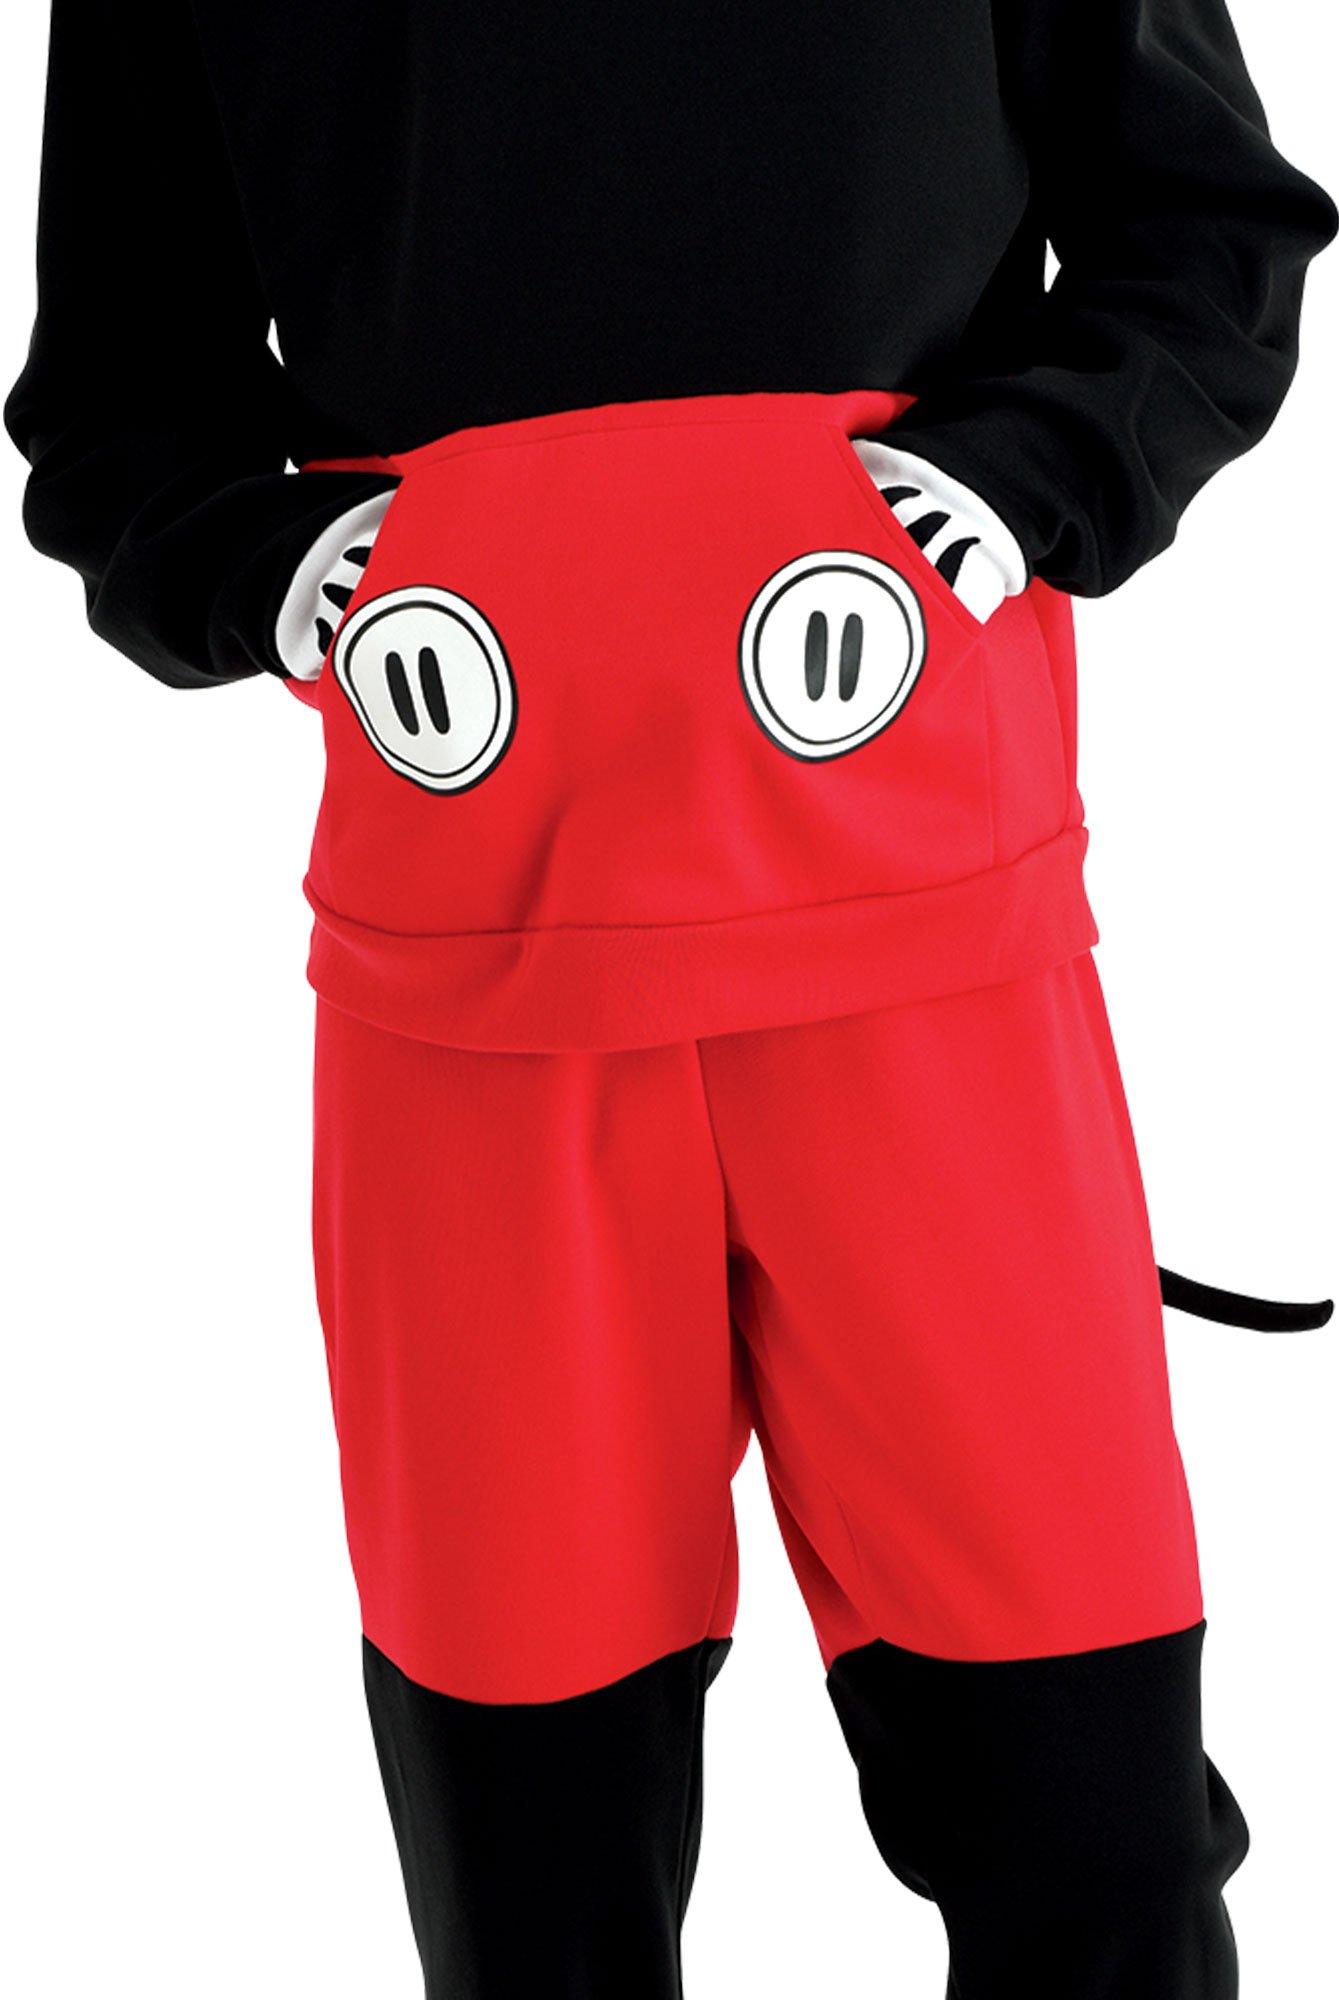 Adult Mickey Mouse Sweatsuit Costume - Disney Size S/M Halloween Male